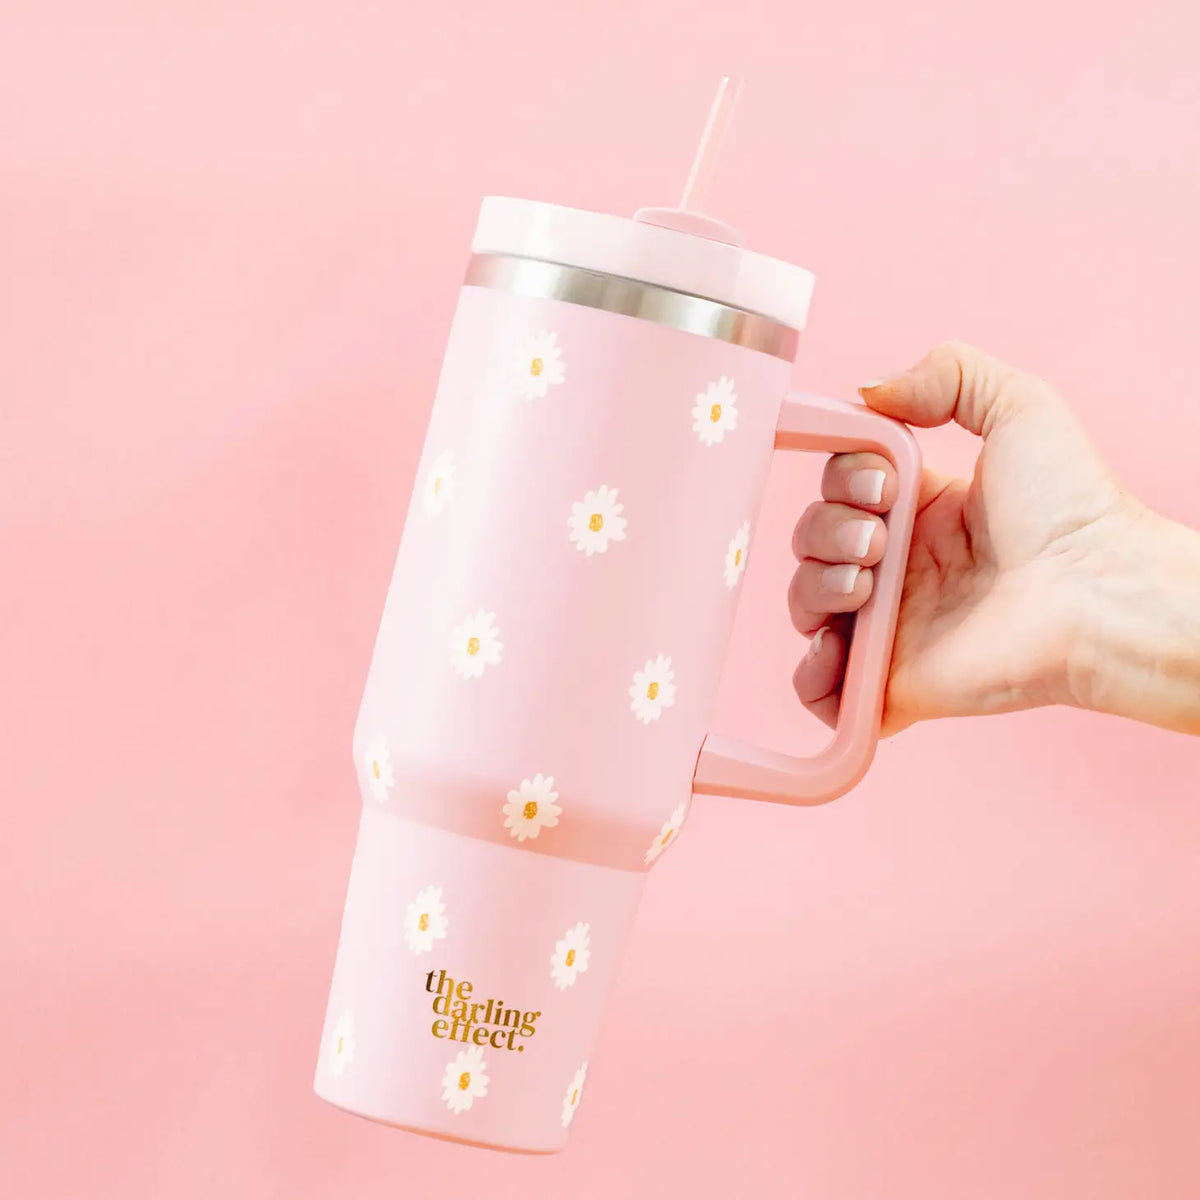 Day you Deserve 40oz Insulated Tumbler with Handle and straw